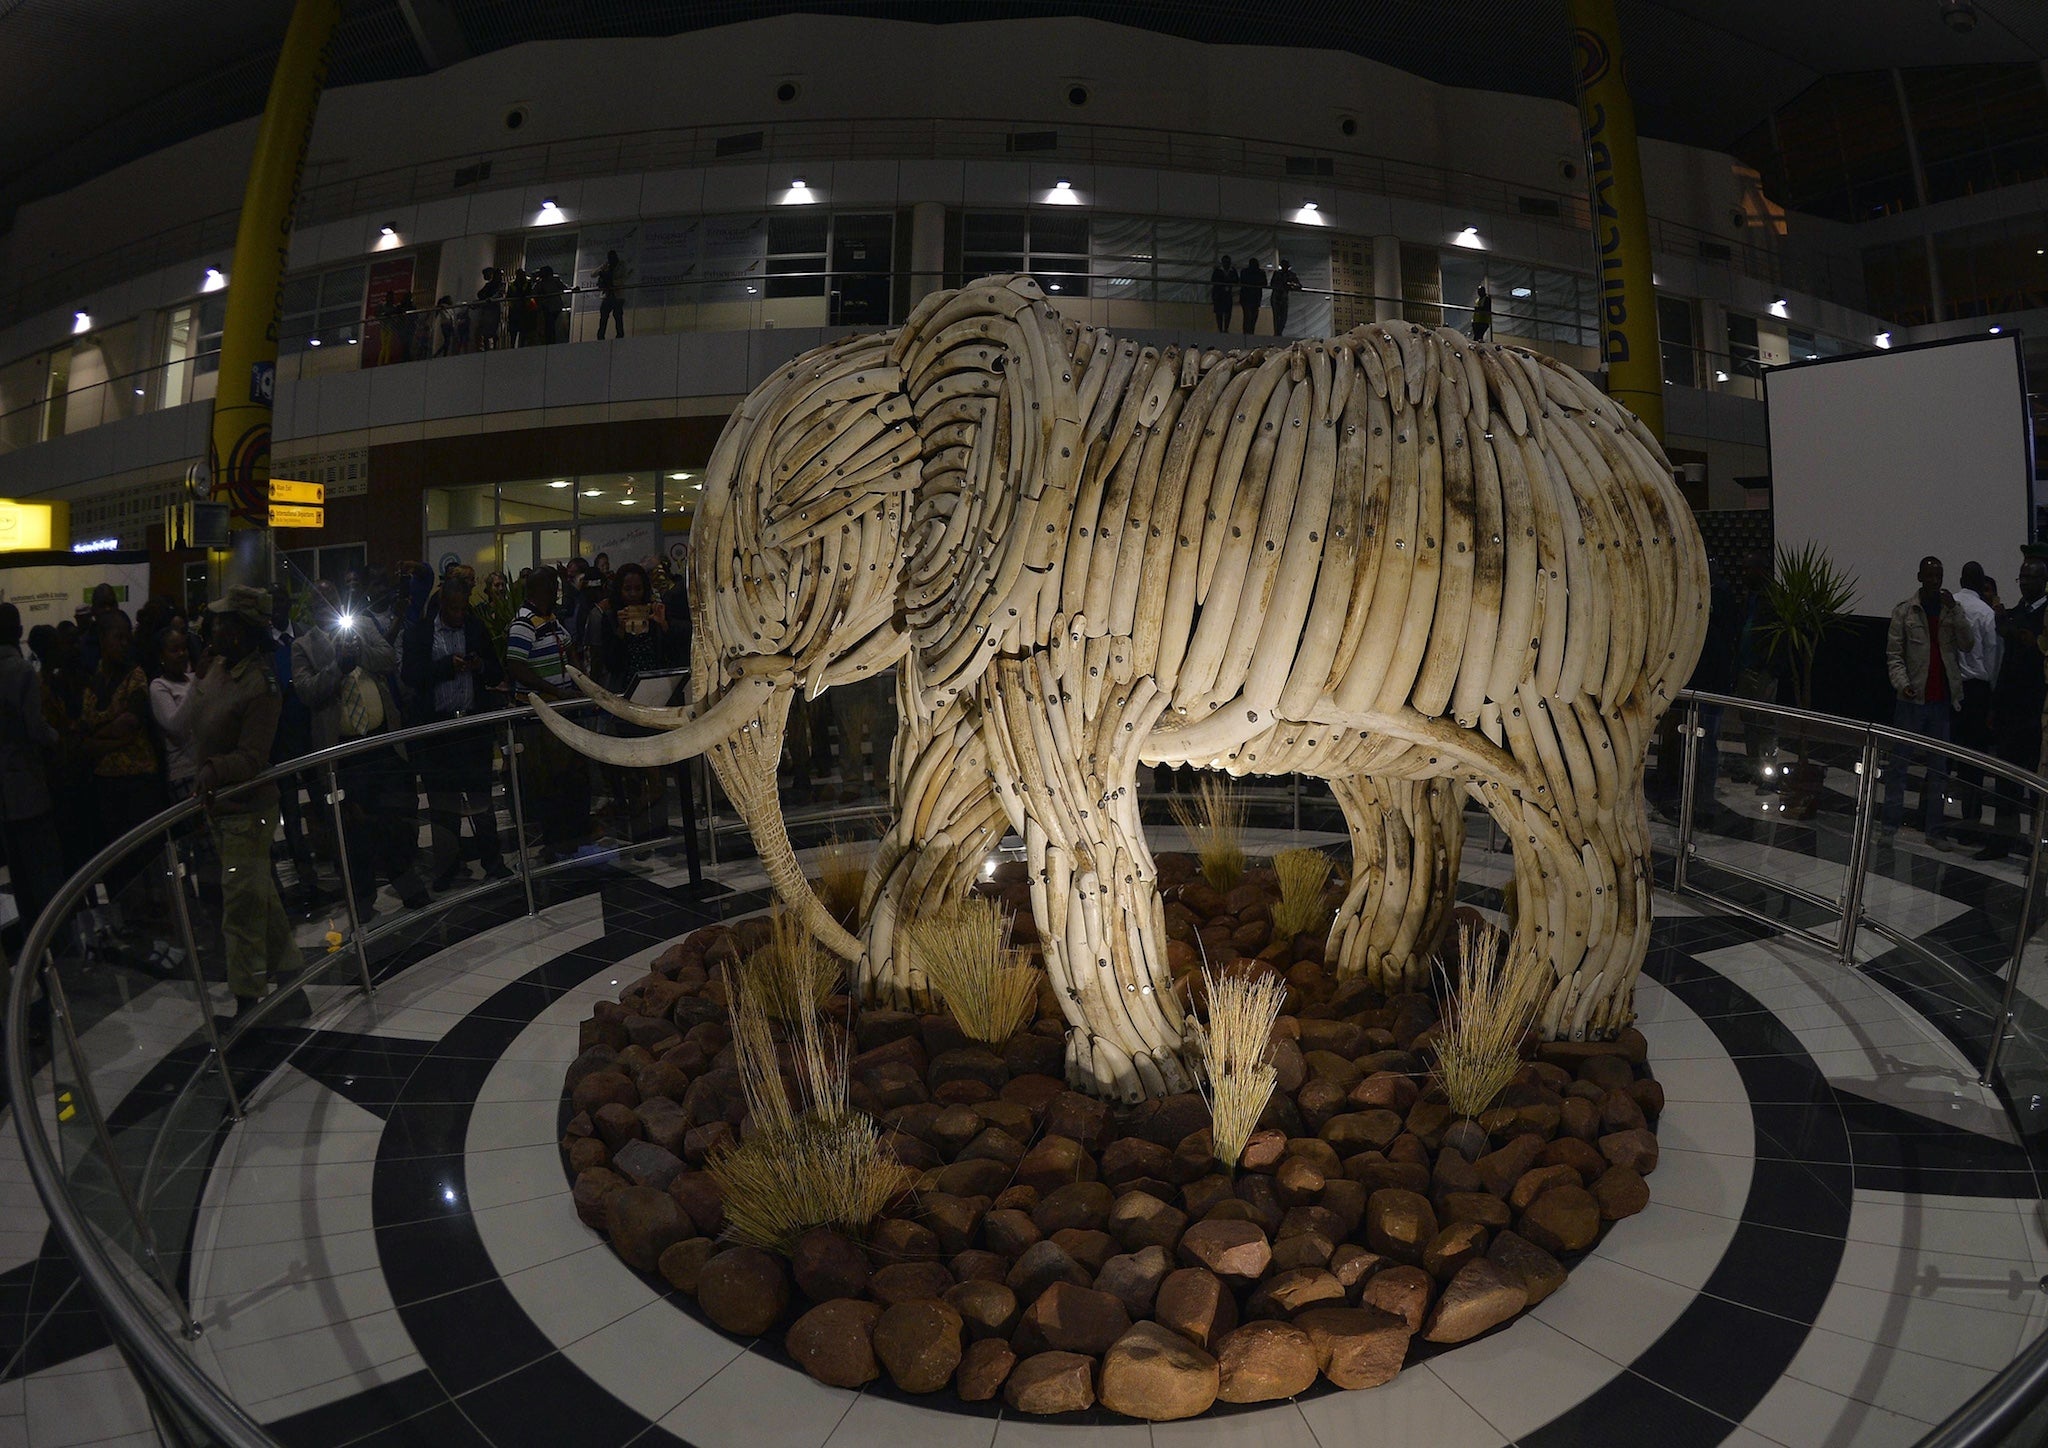 A life-size ivory elephant sculpture after it was unveiled at the Sir Seretse Khama International Airport in Gaborone, Botswana in July